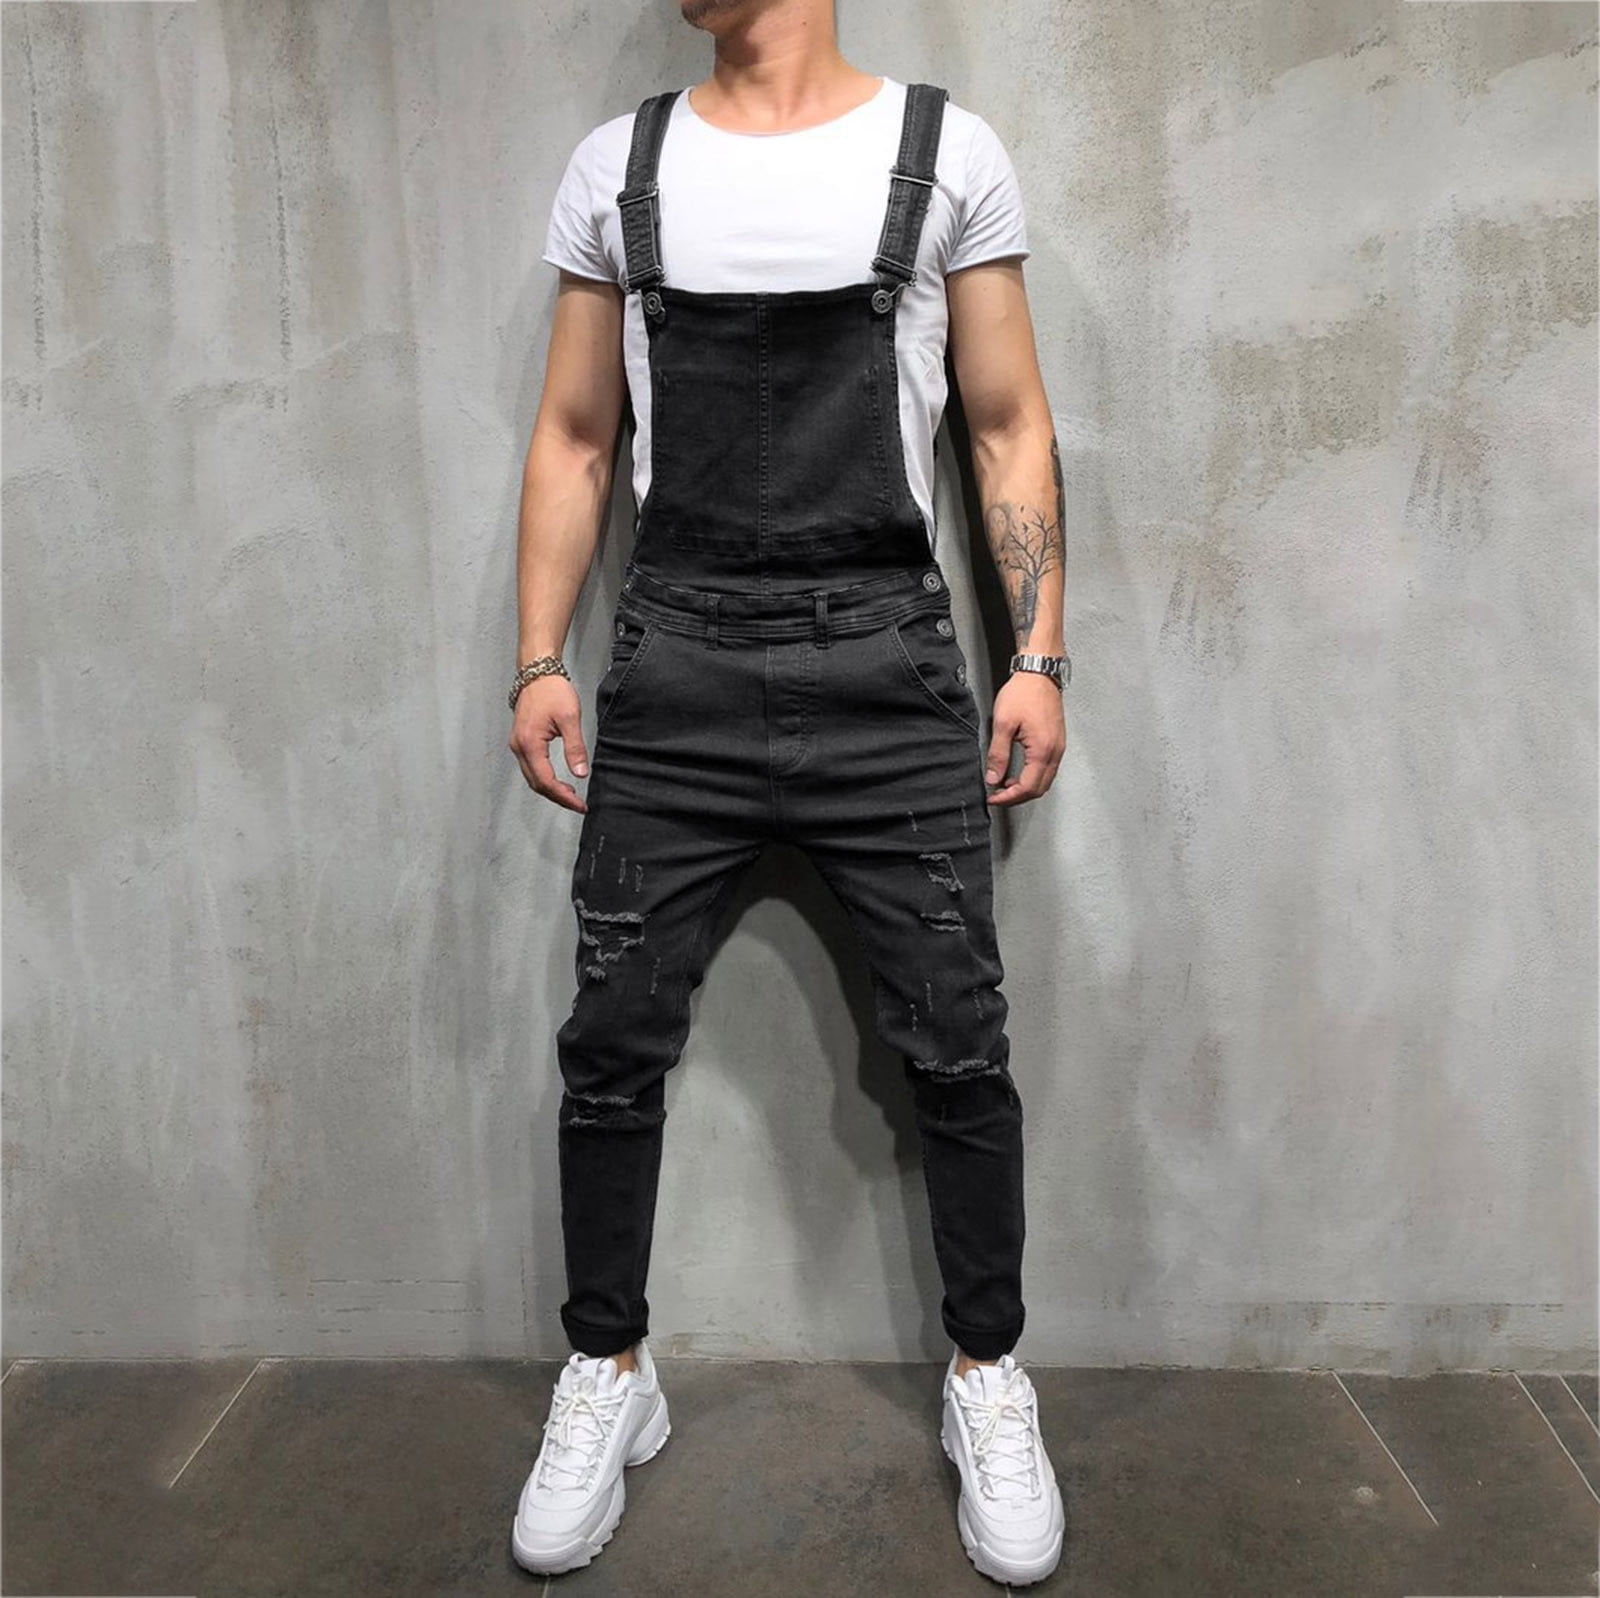 SBYOJLPB Men Pants Clearance Mens Washed Denim Bib Jeans Overalls Casual  Ripped Denim Jumpsuits Rompers Special offers 